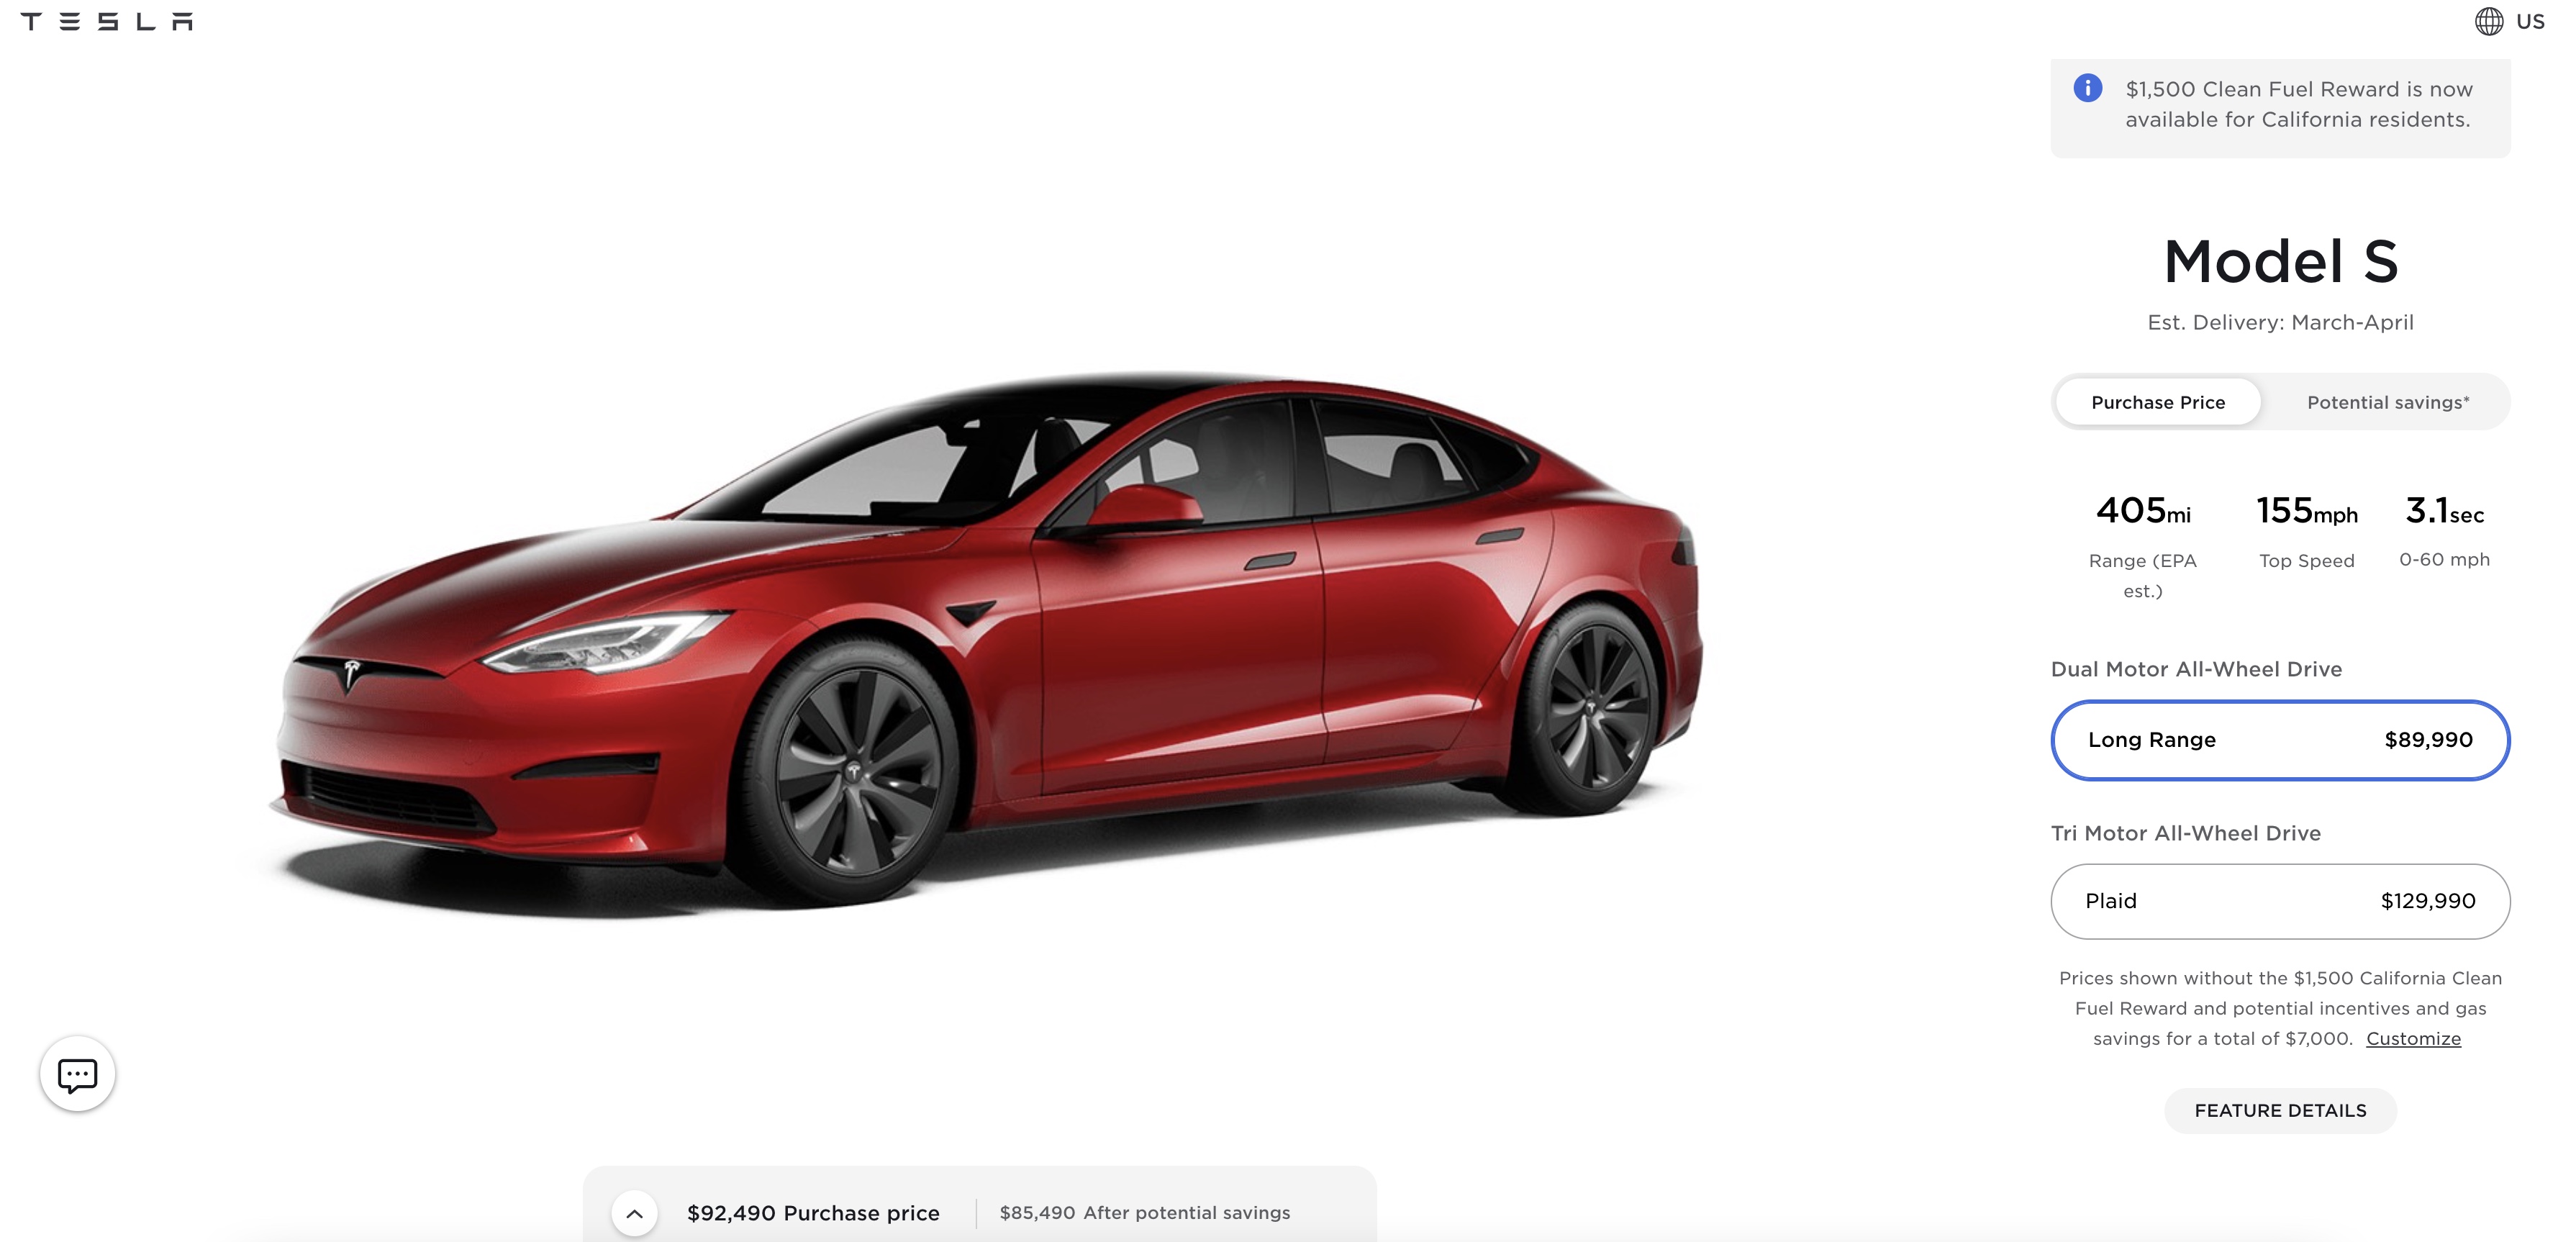 Tesla increases Model S price by another $5,000